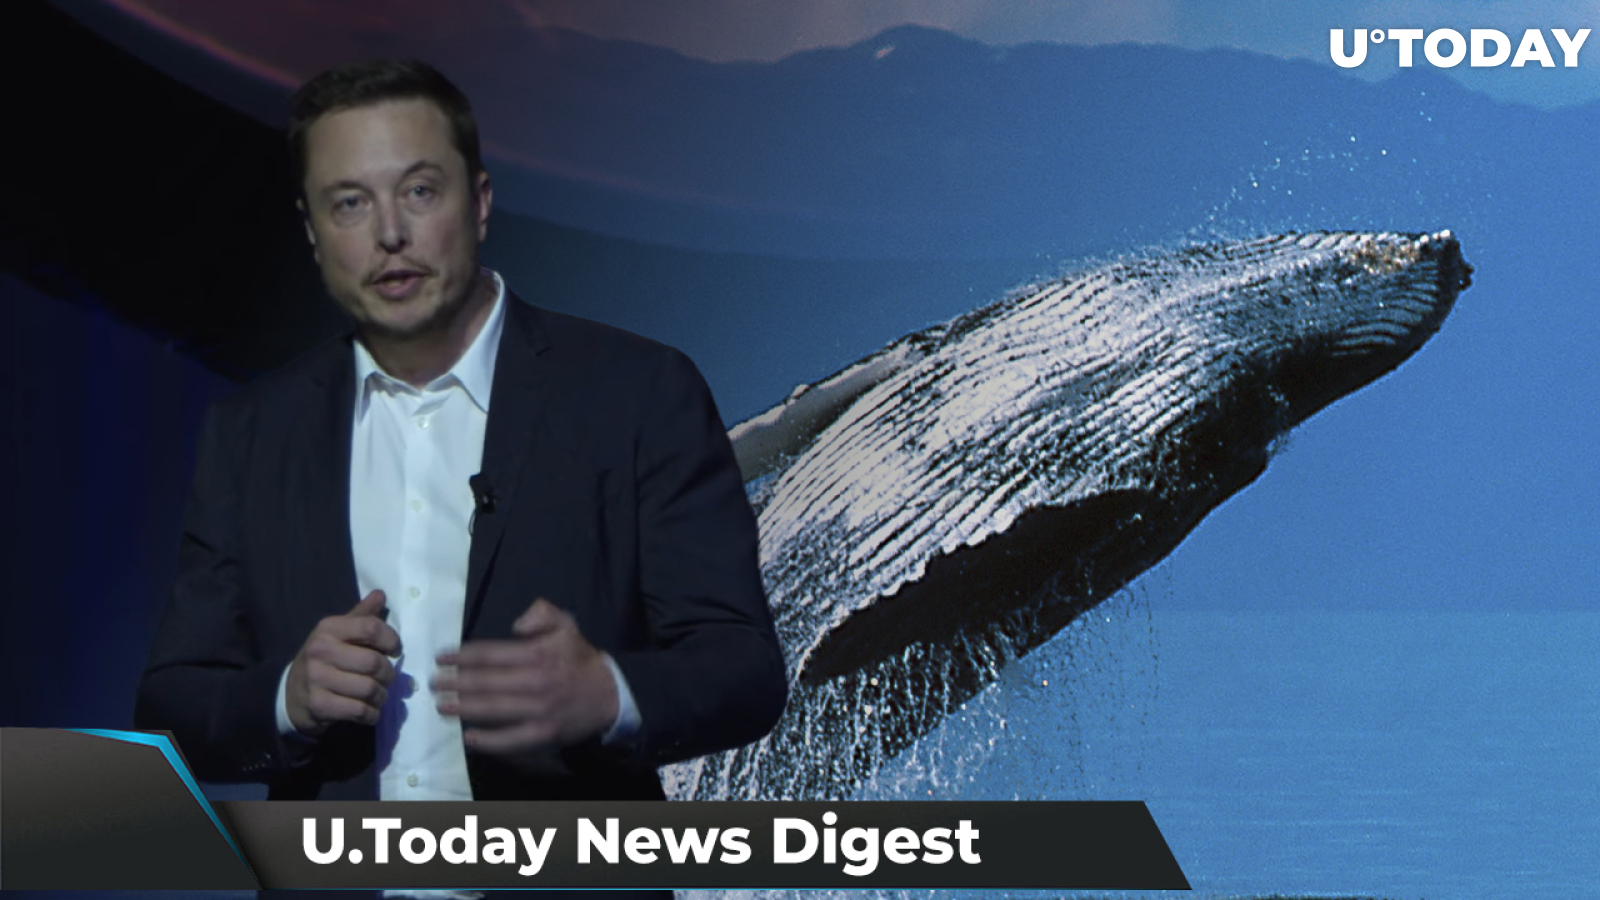 Musk Wants to Be Dogecoin’s Fake CEO, ETH Whale Grabs 153 Billion SHIB, Shiba Inu Times Square Ad Is Fake: Crypto News Digest by U.Today